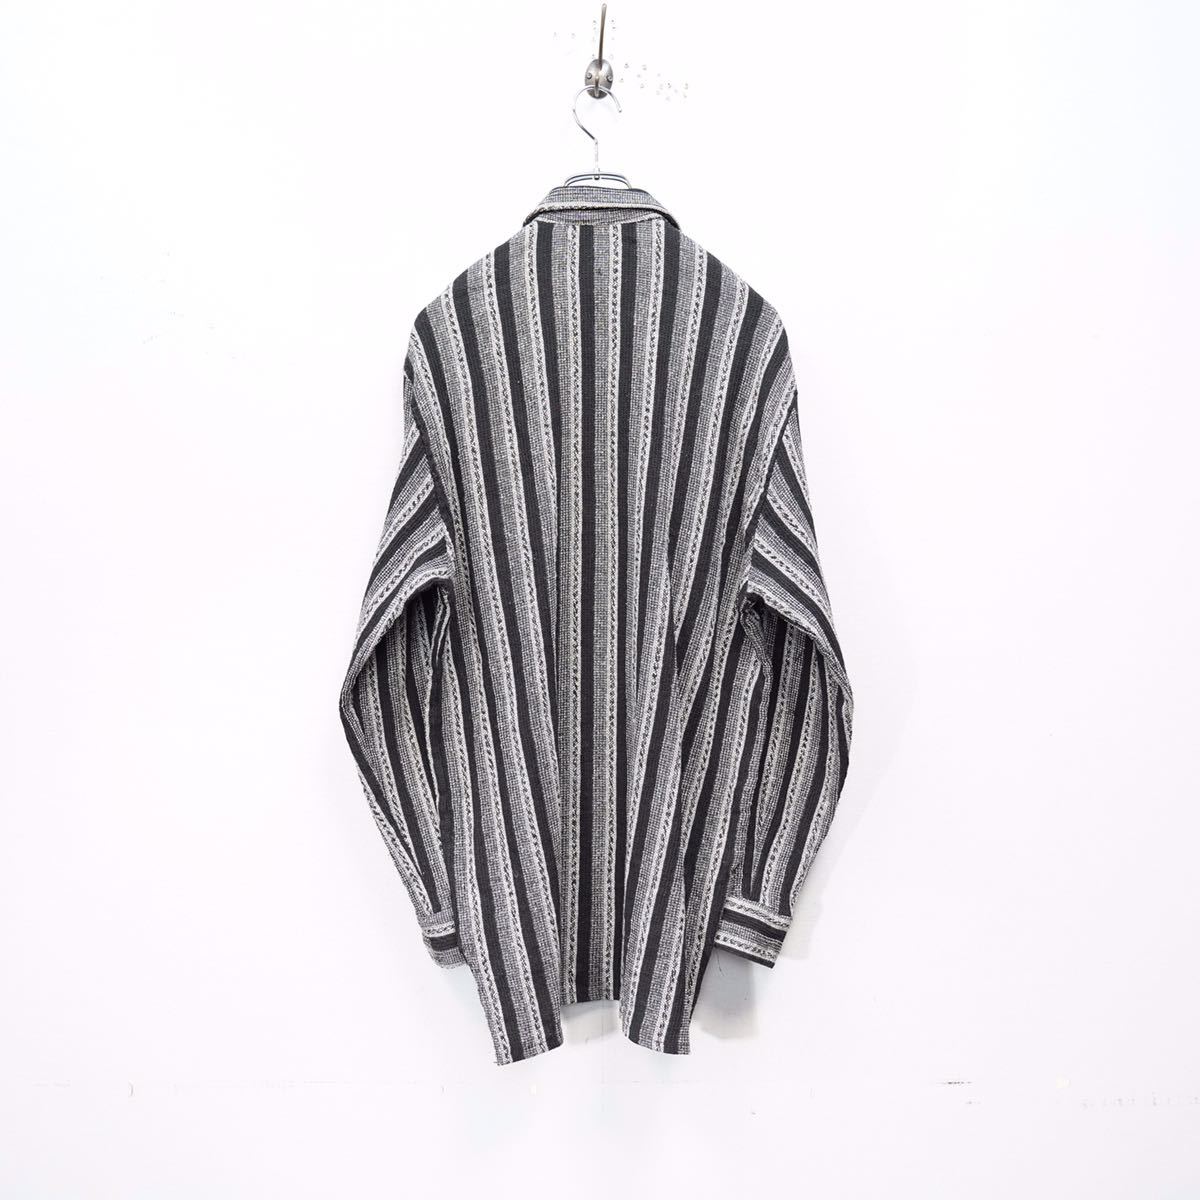 EU VINTAGE Berry Time STRIPE PATTERNED ZIP UP BLOUSON MADE IN ITALY/ヨーロッパ古着ストライプ柄ジップアップブルゾン